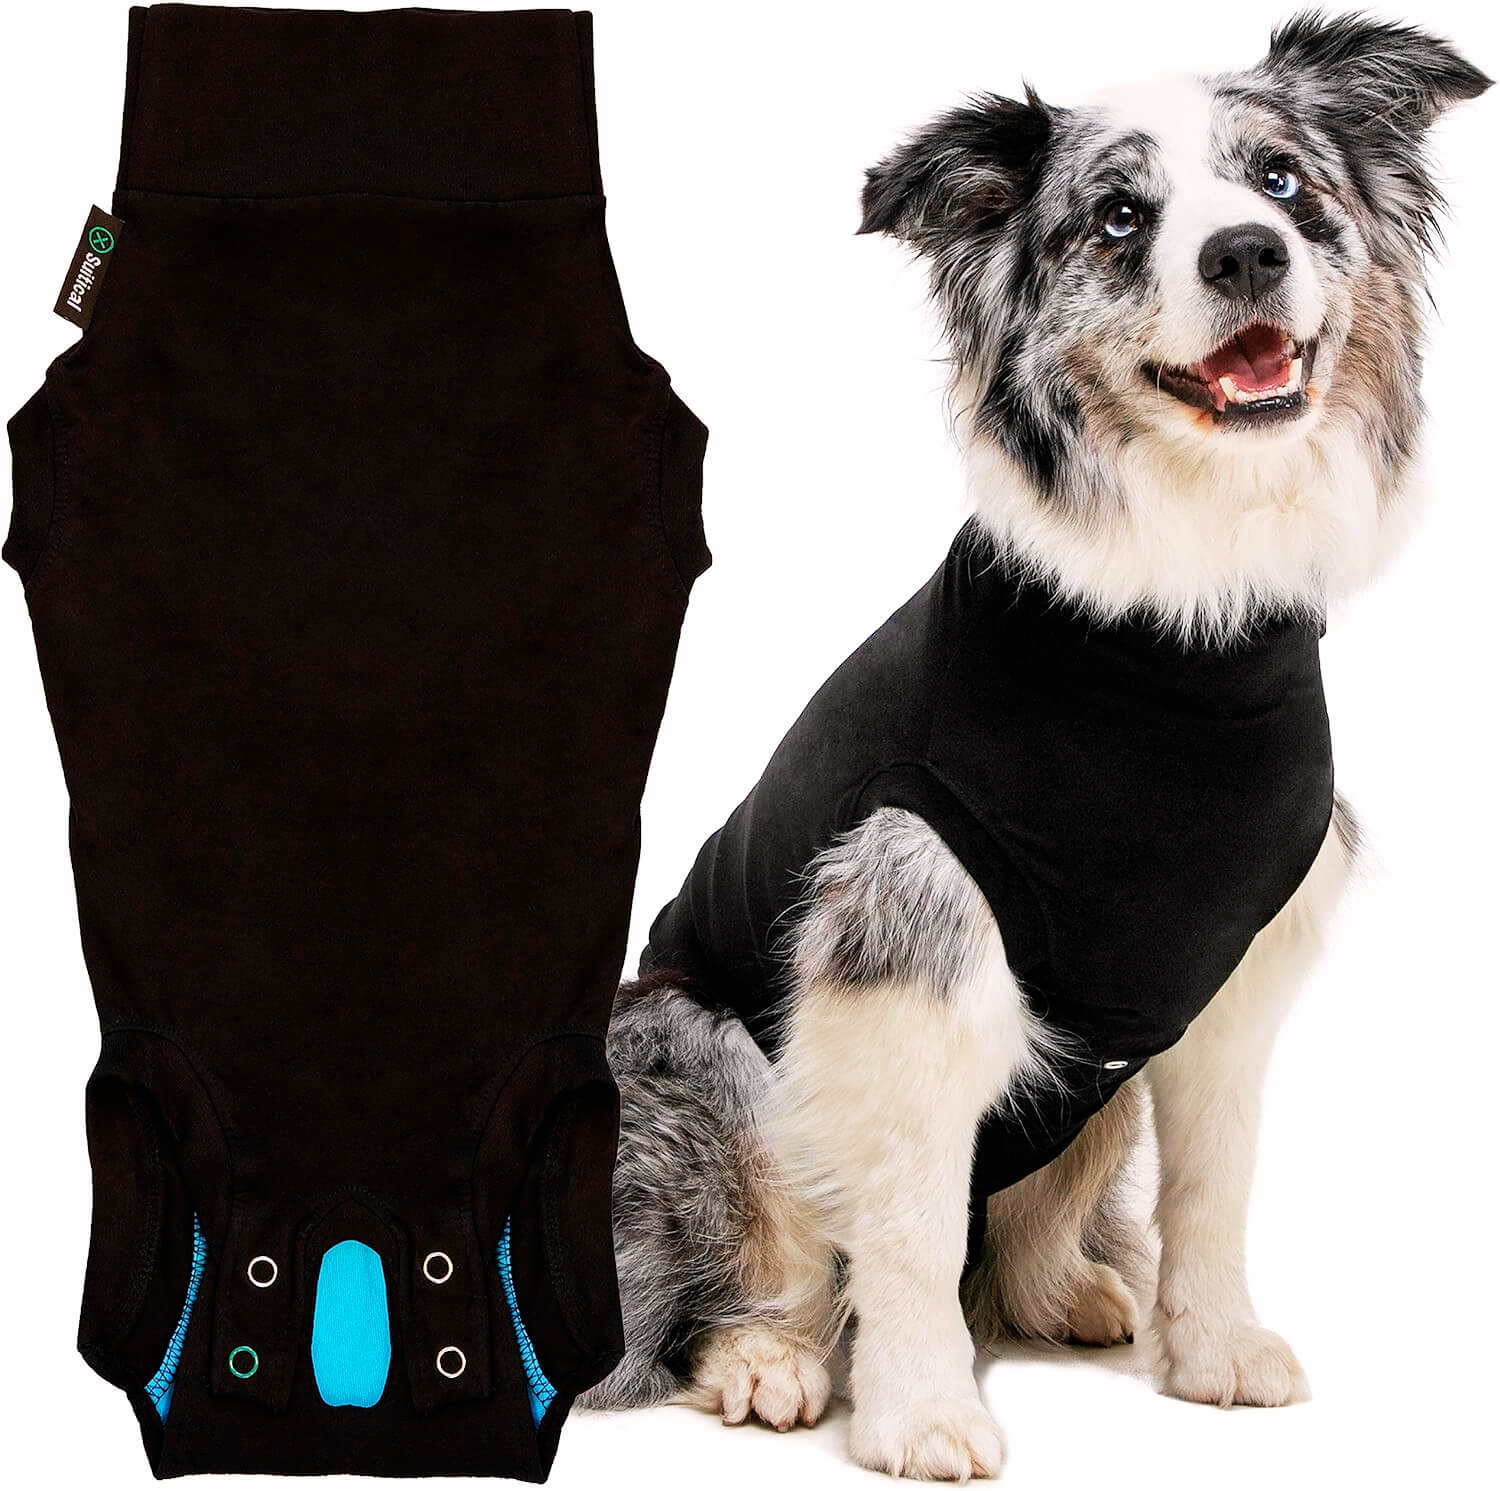 Recovery Suit for Dogs